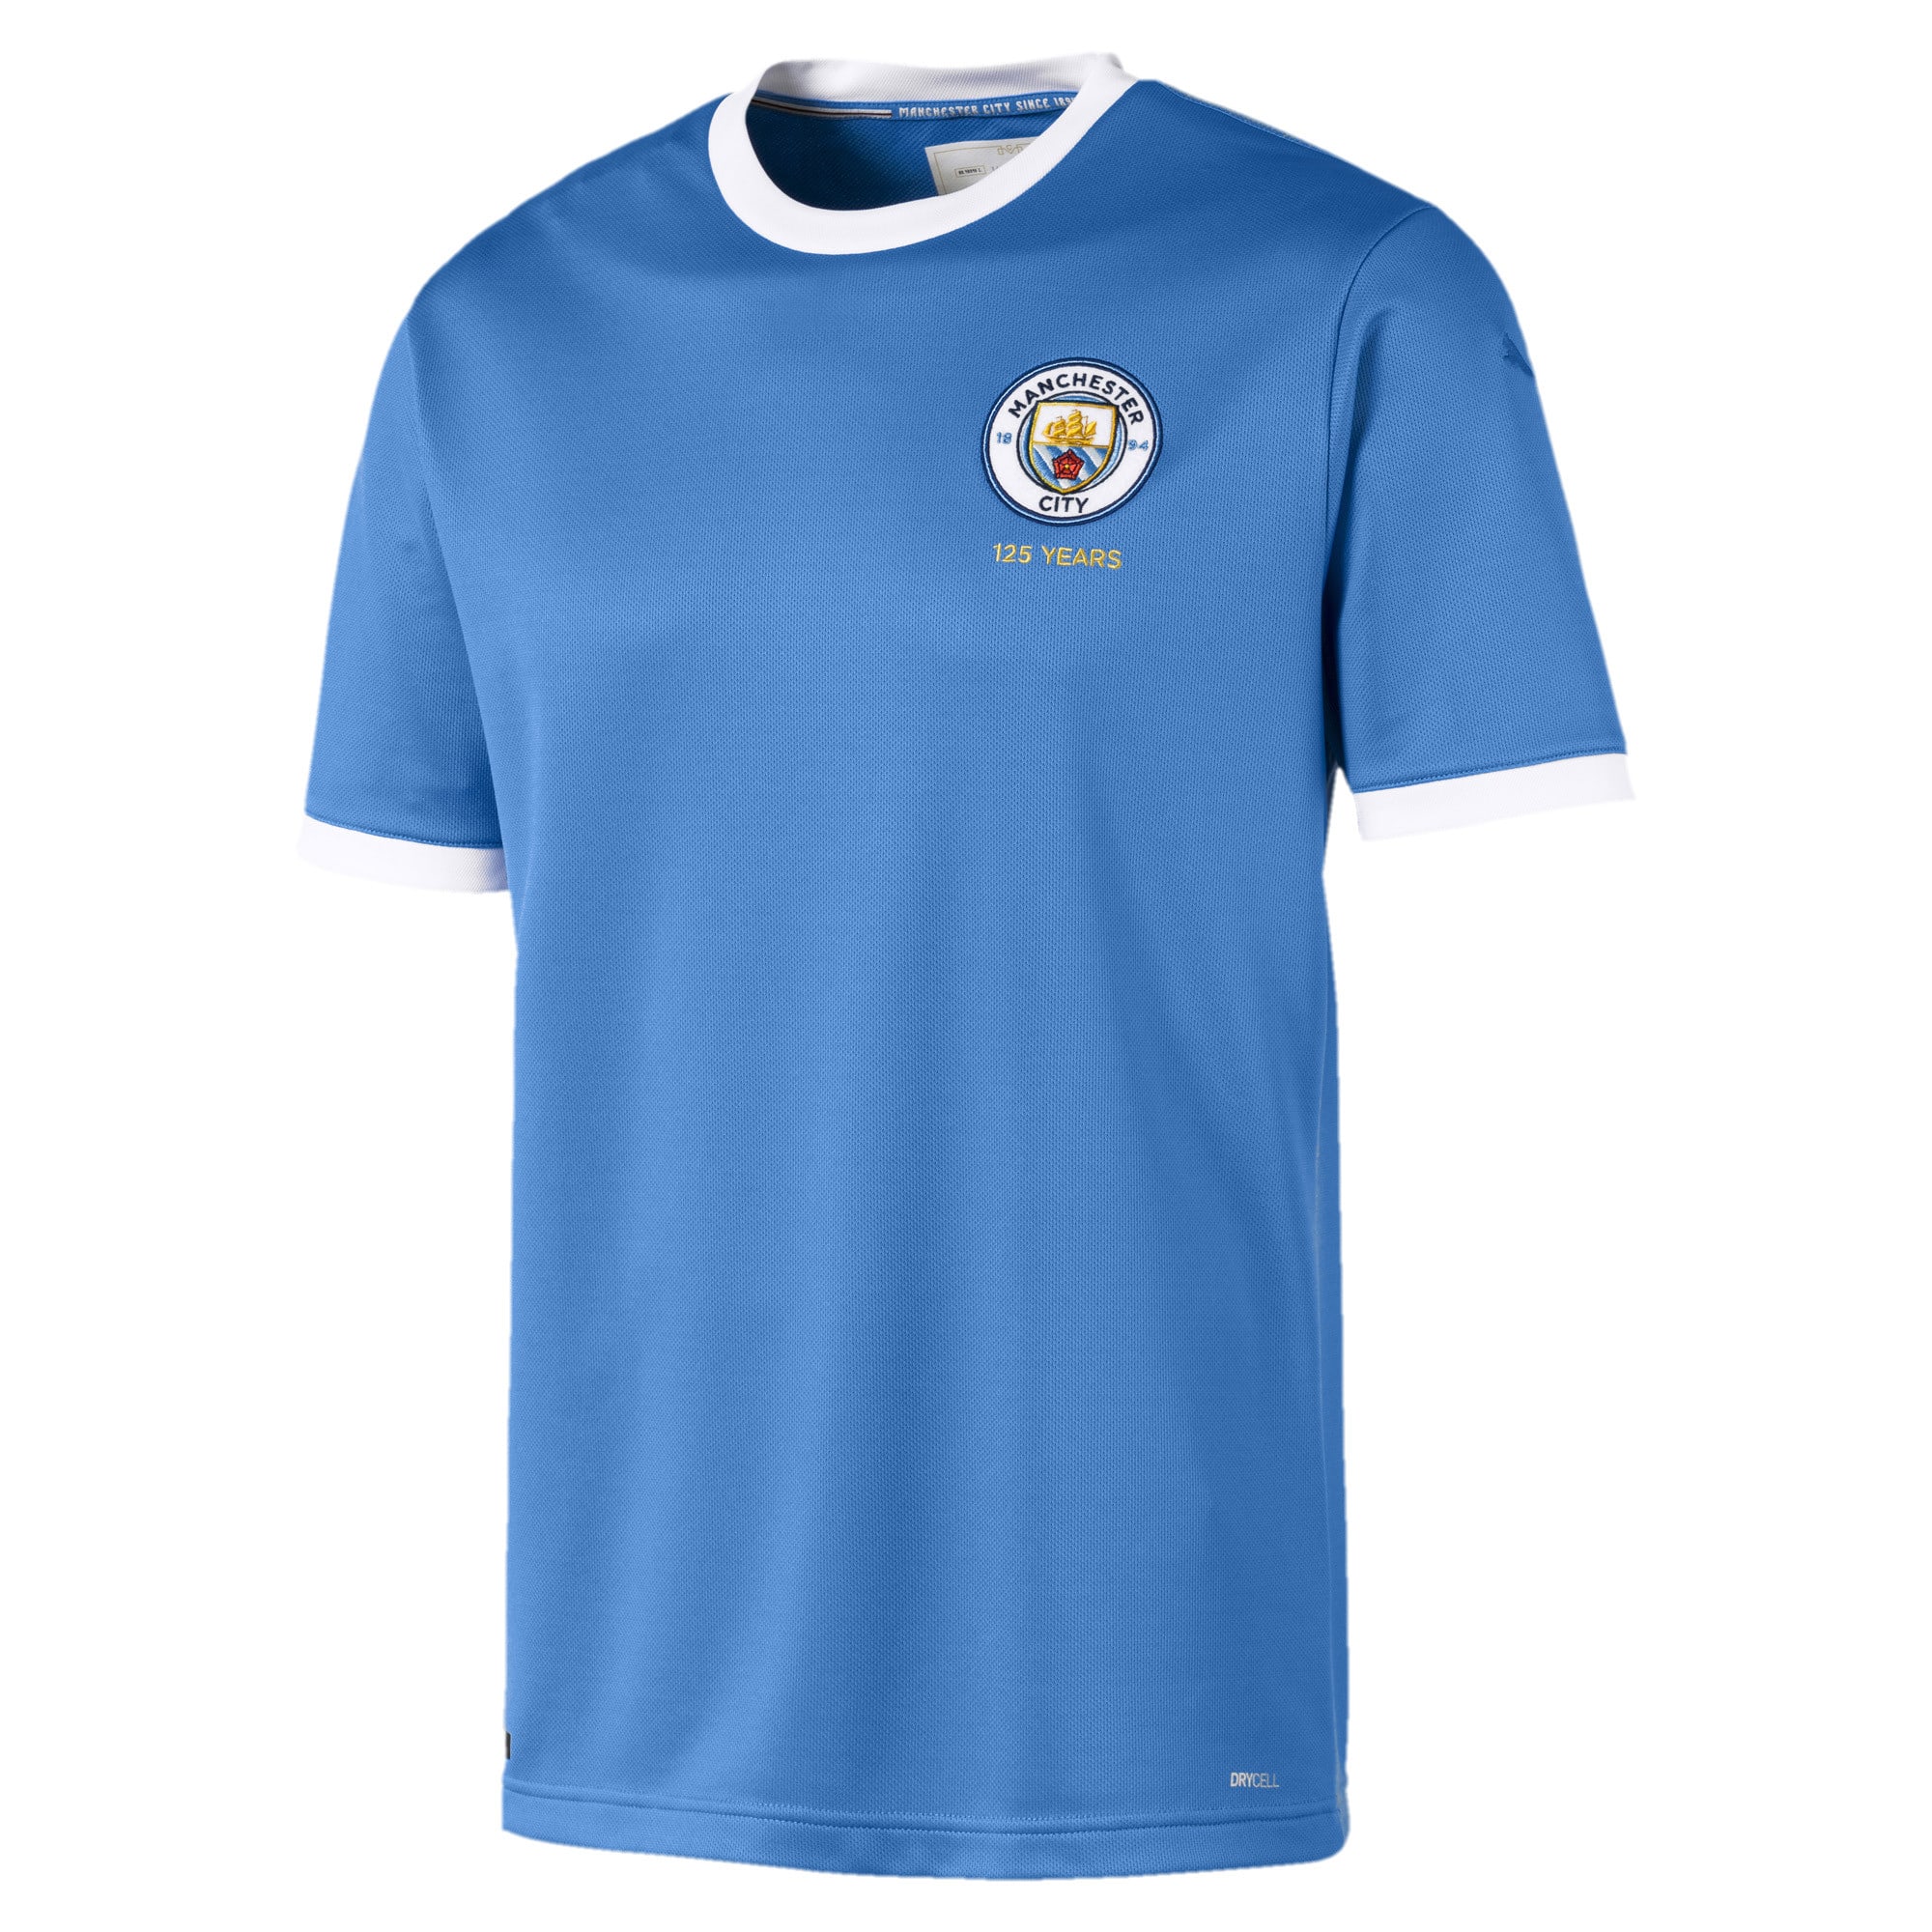 MANCHESTER CITY FC 125TH ANNIVERSARY JERSEY